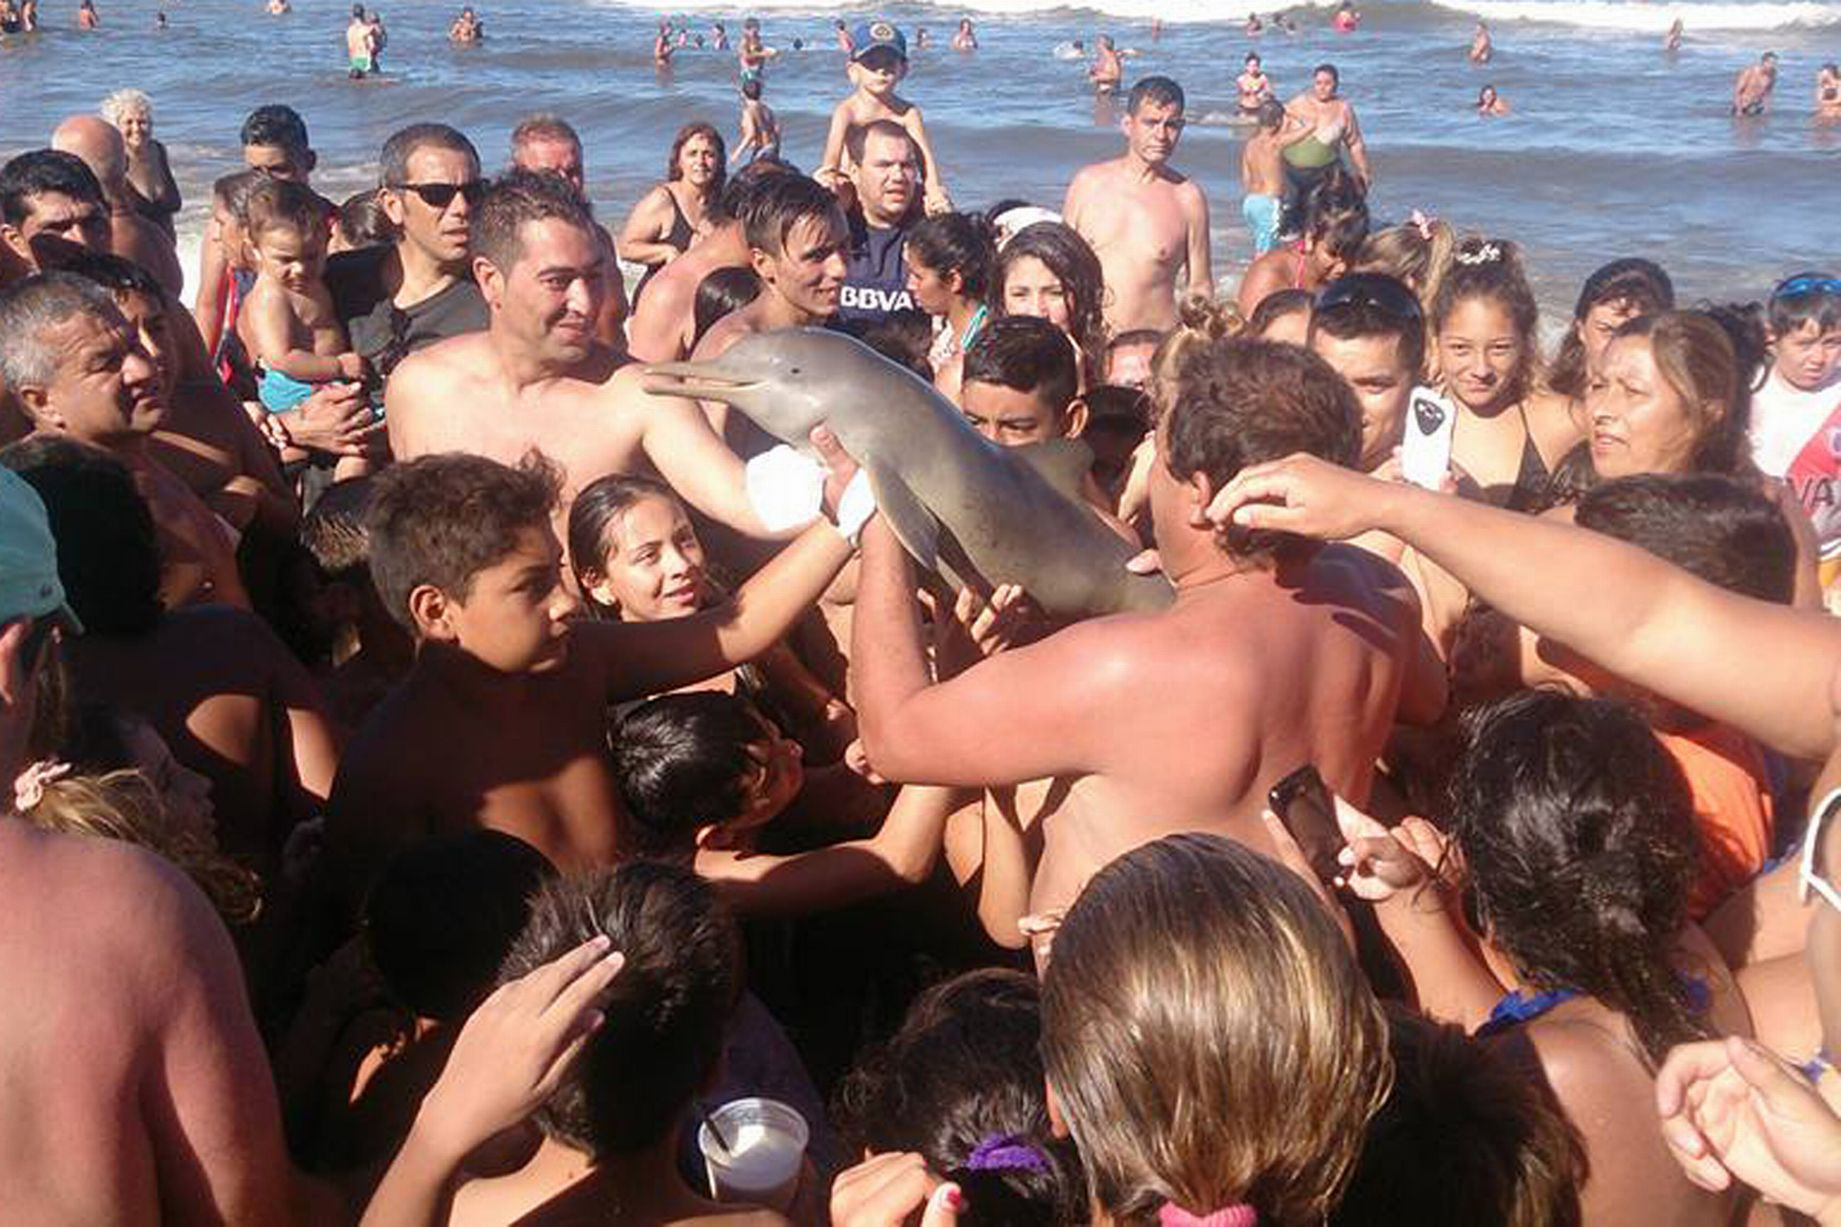 A baby dolphin died in Argentina after being plucked from the water to take pictures with